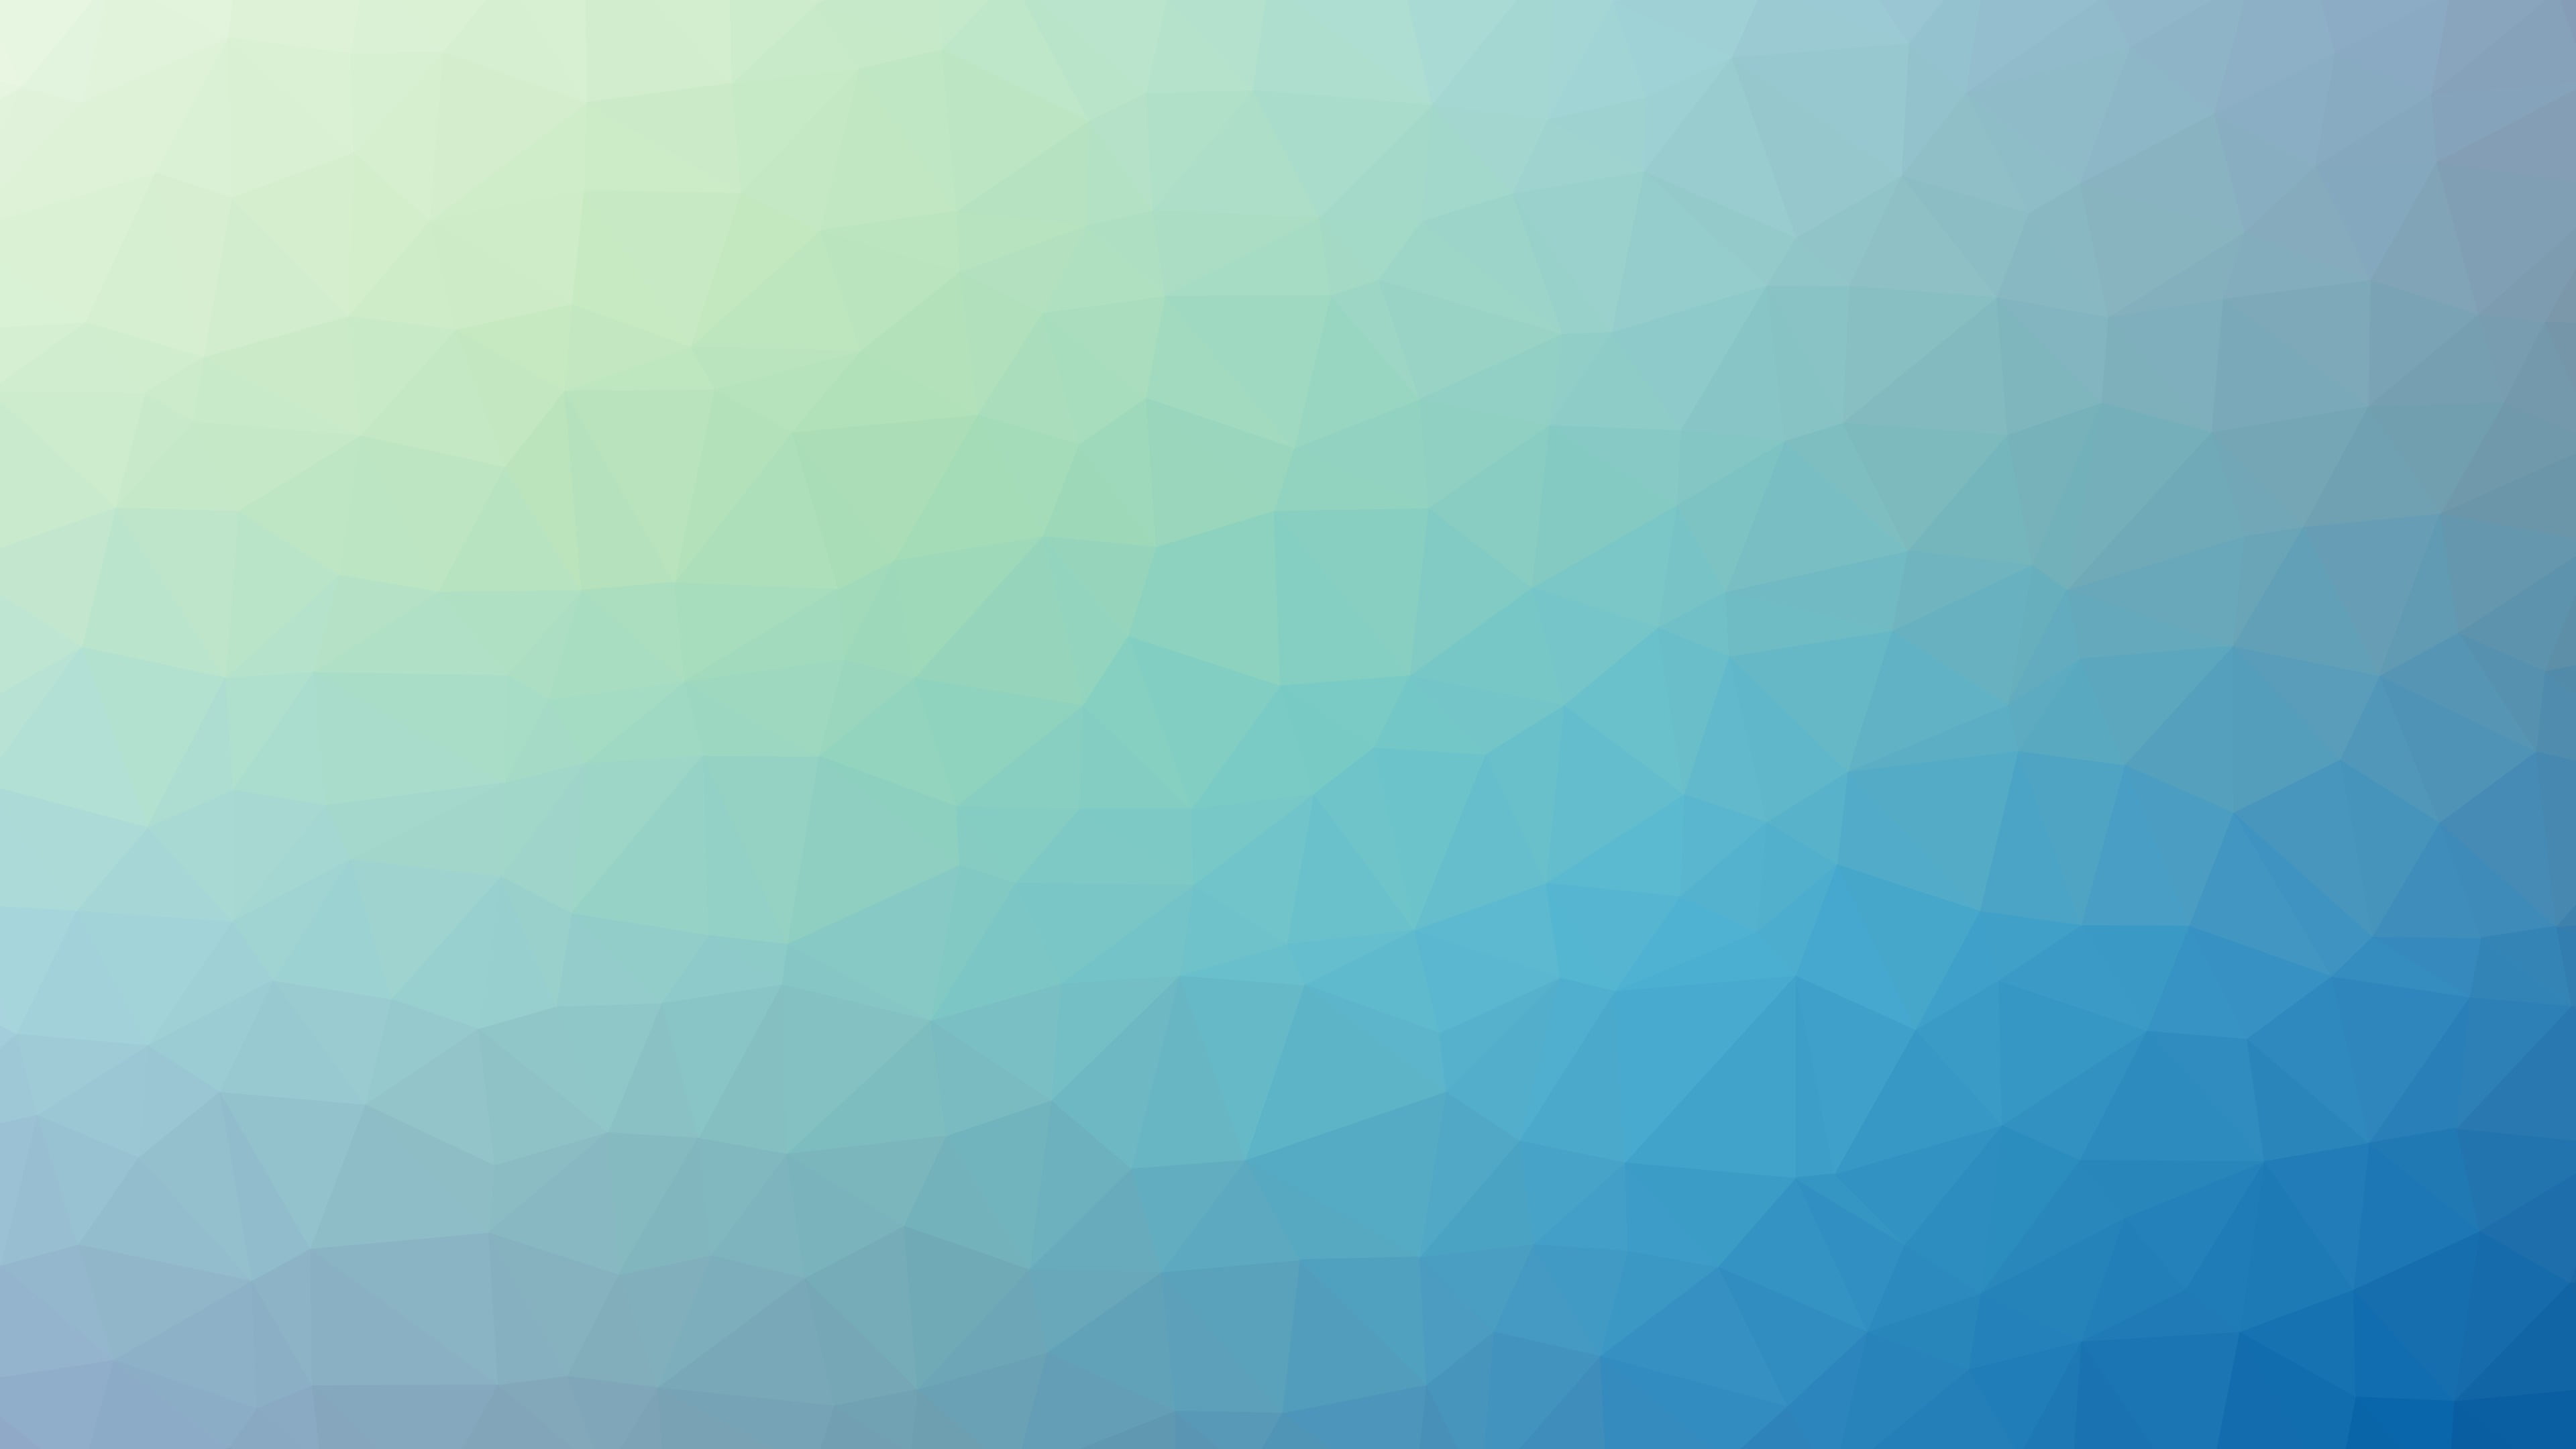 low poly, backgrounds, full frame, pattern, abstract, green color